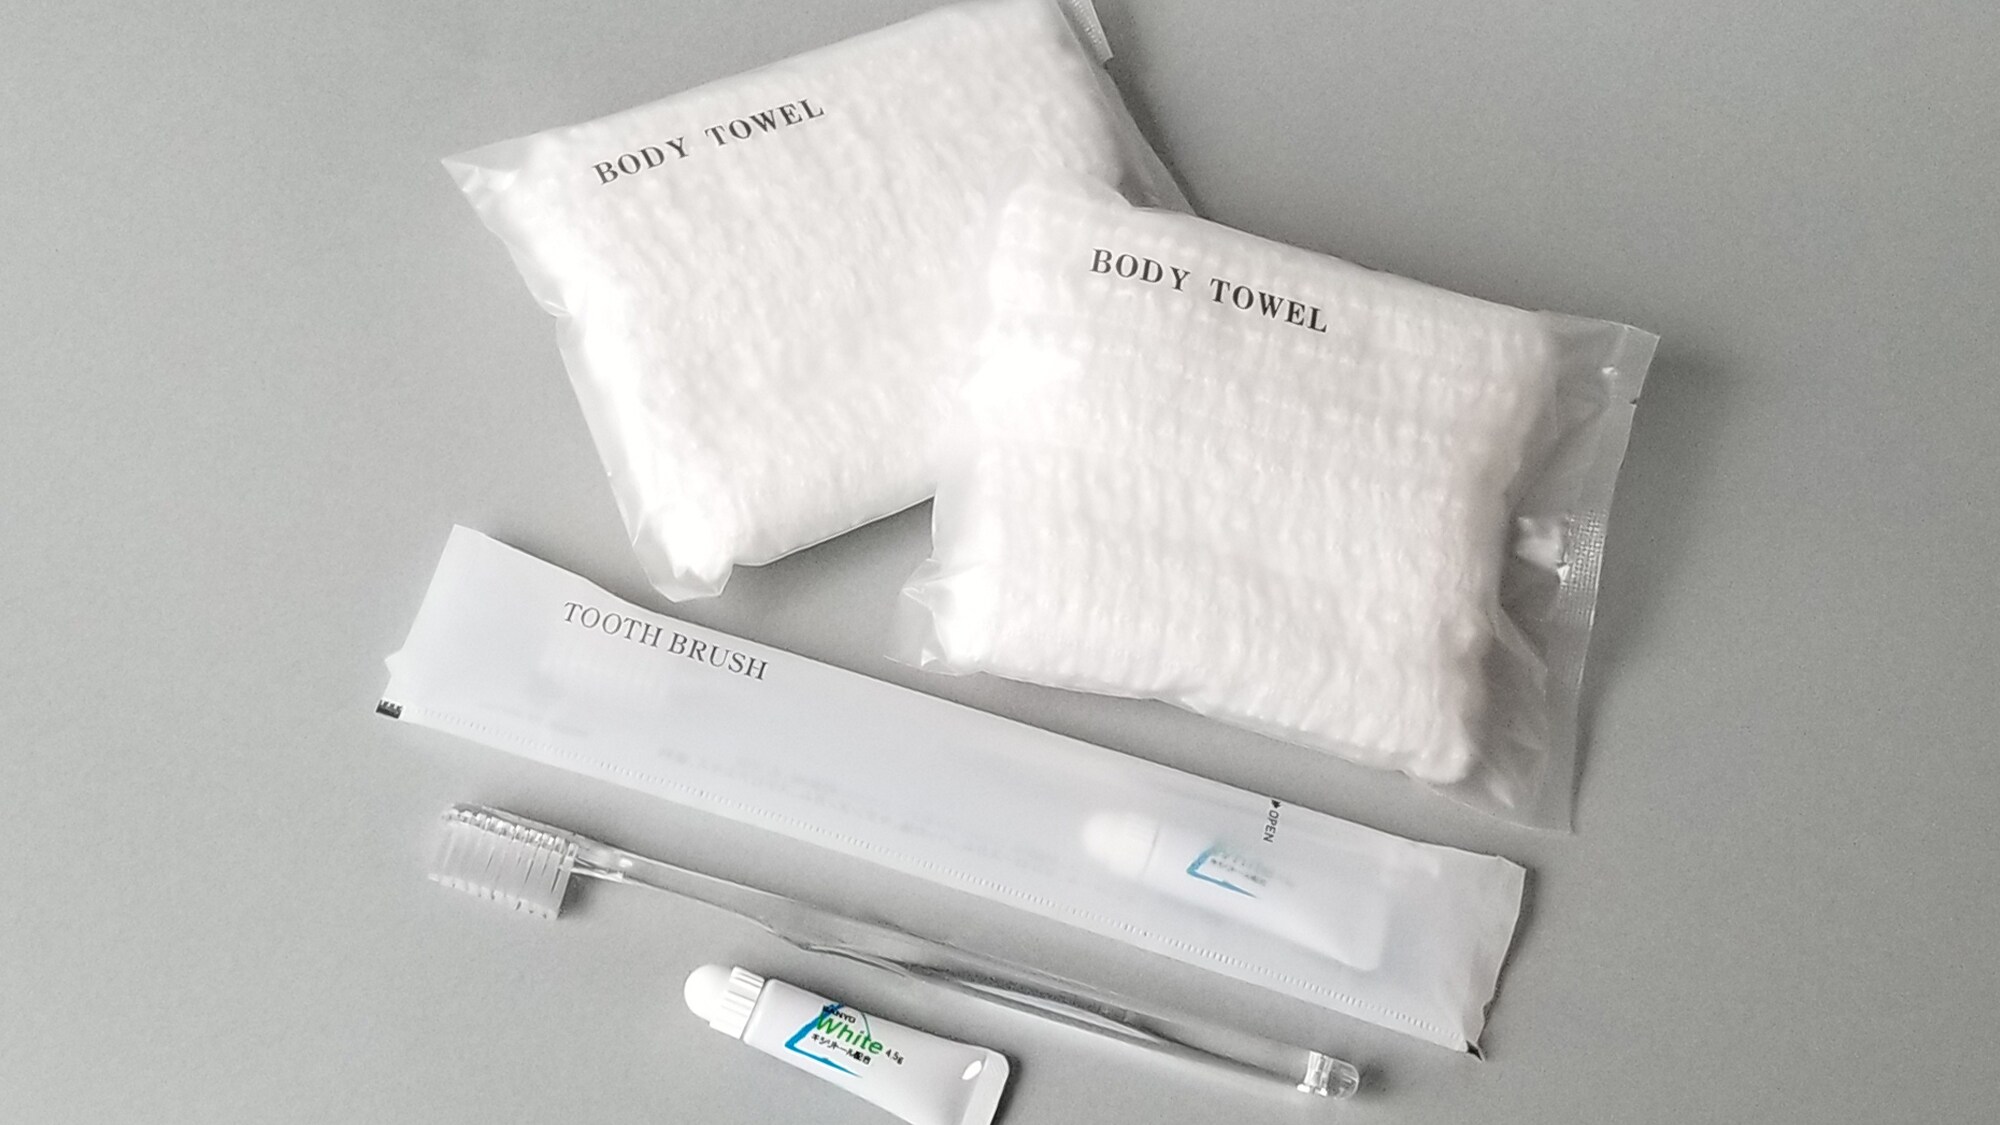 Toothbrush and body towel (provided at the front lobby)